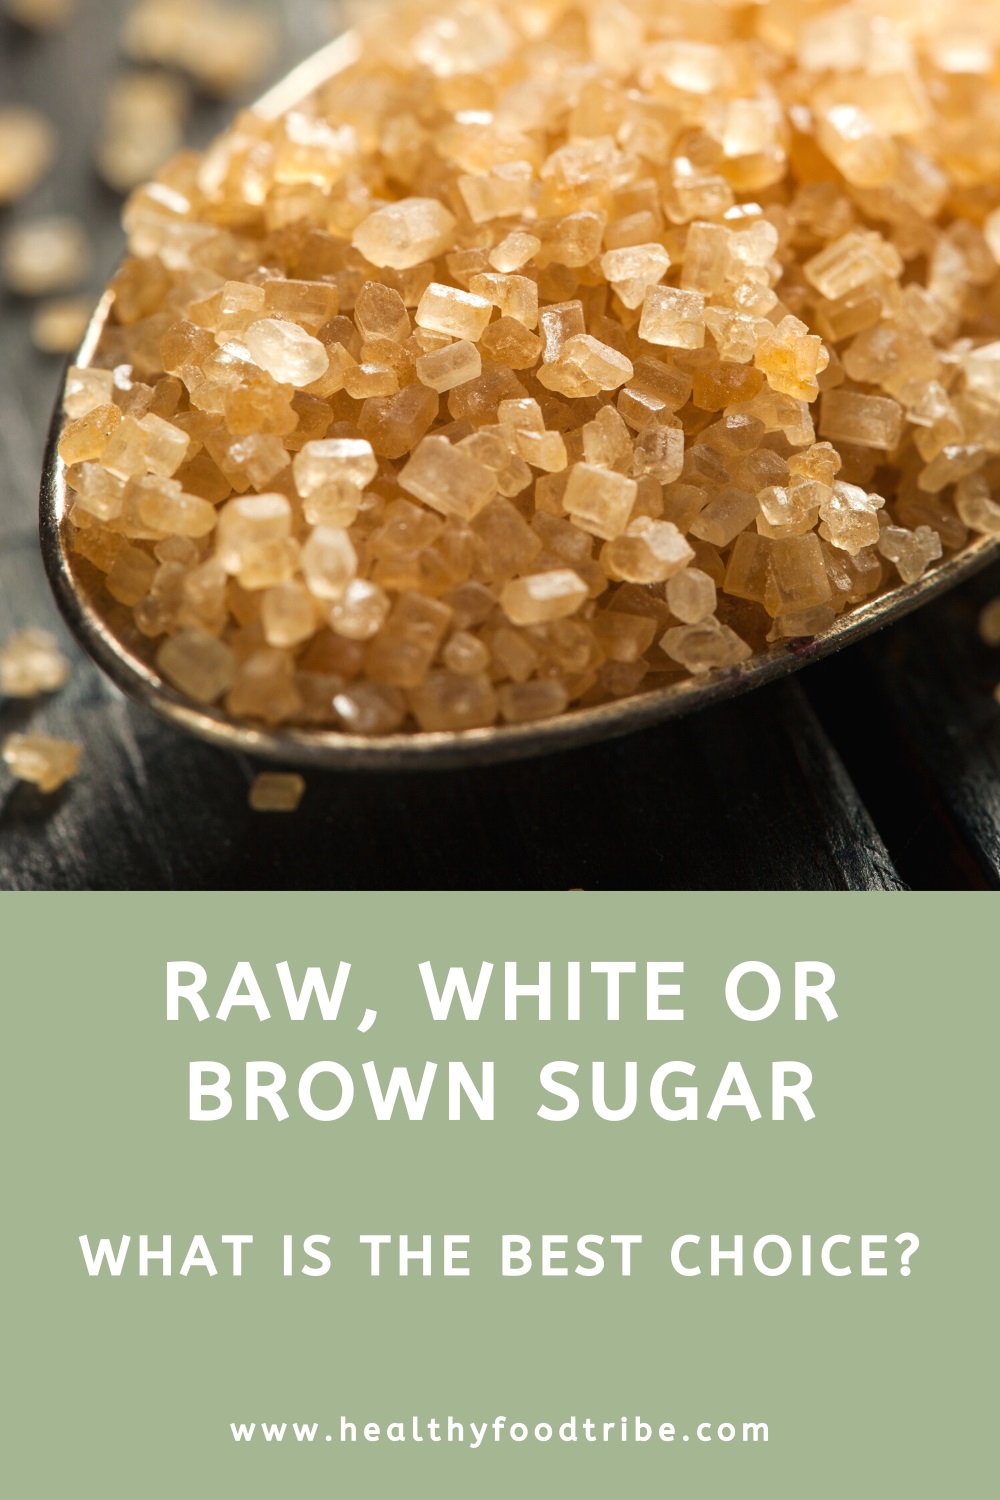 Differences between raw, white and brown sugar